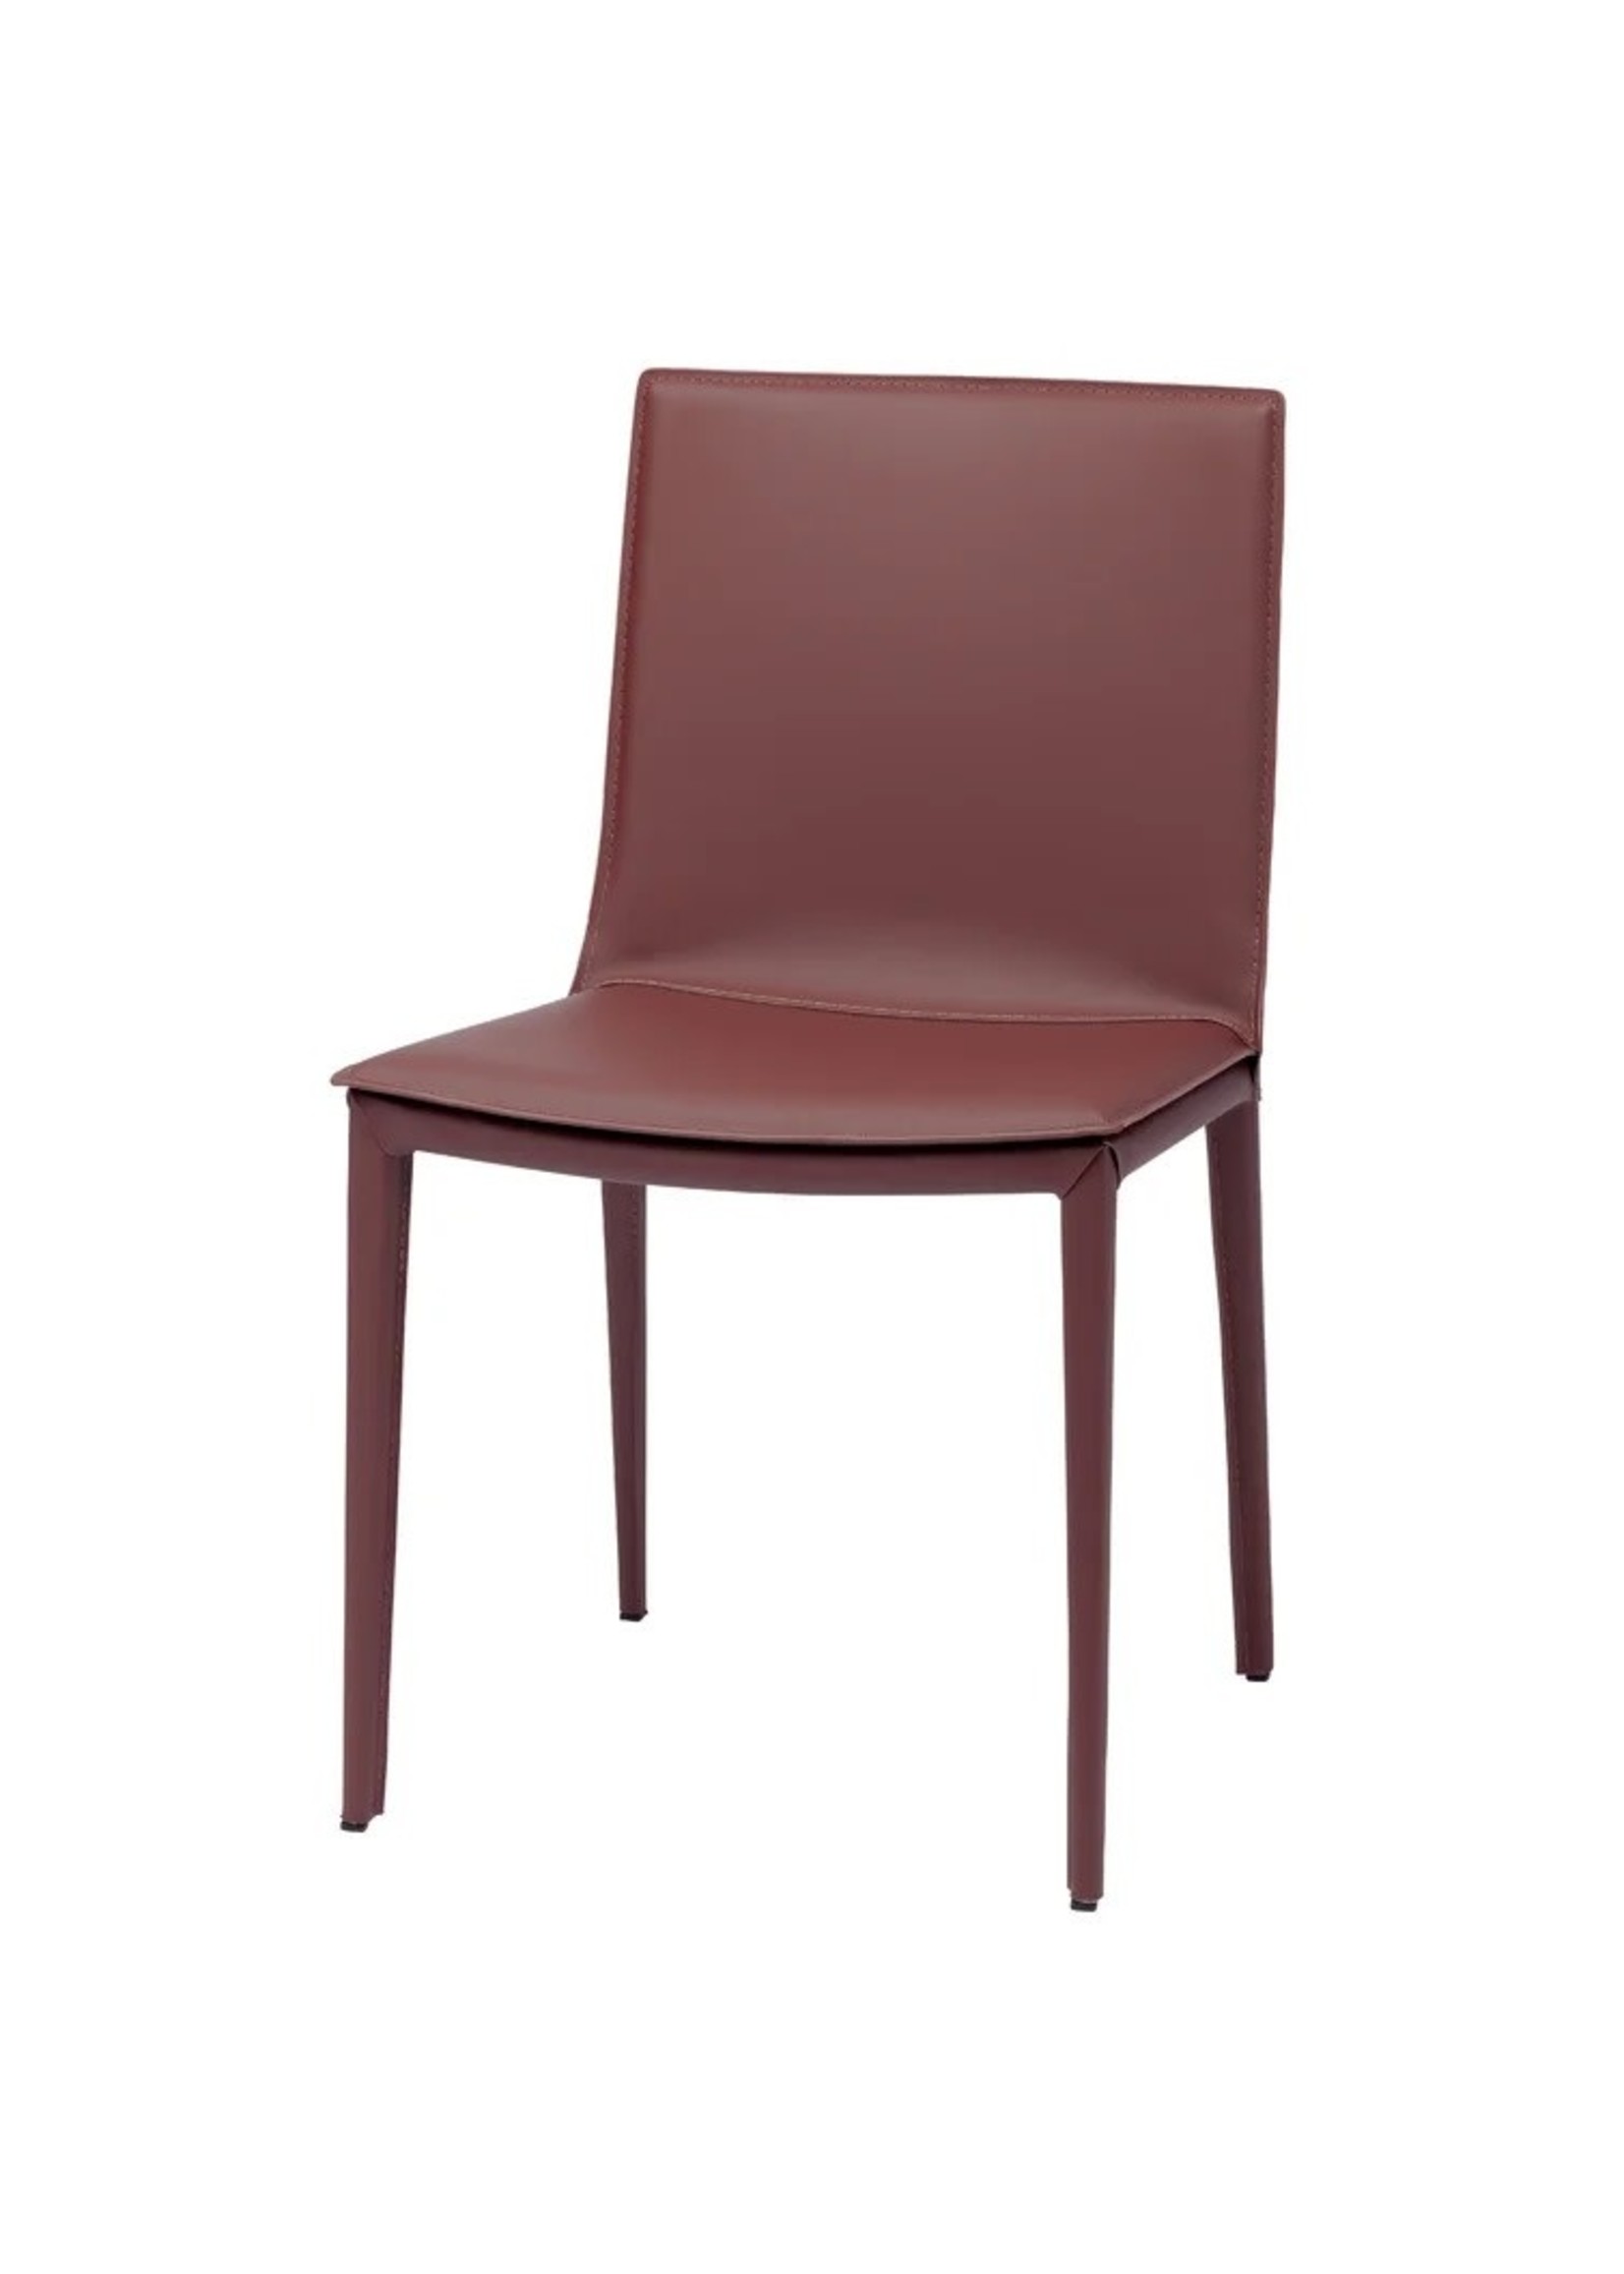 *Schrock Leather Upholstered Dining Chairs - Set of 2 - Bordeaux